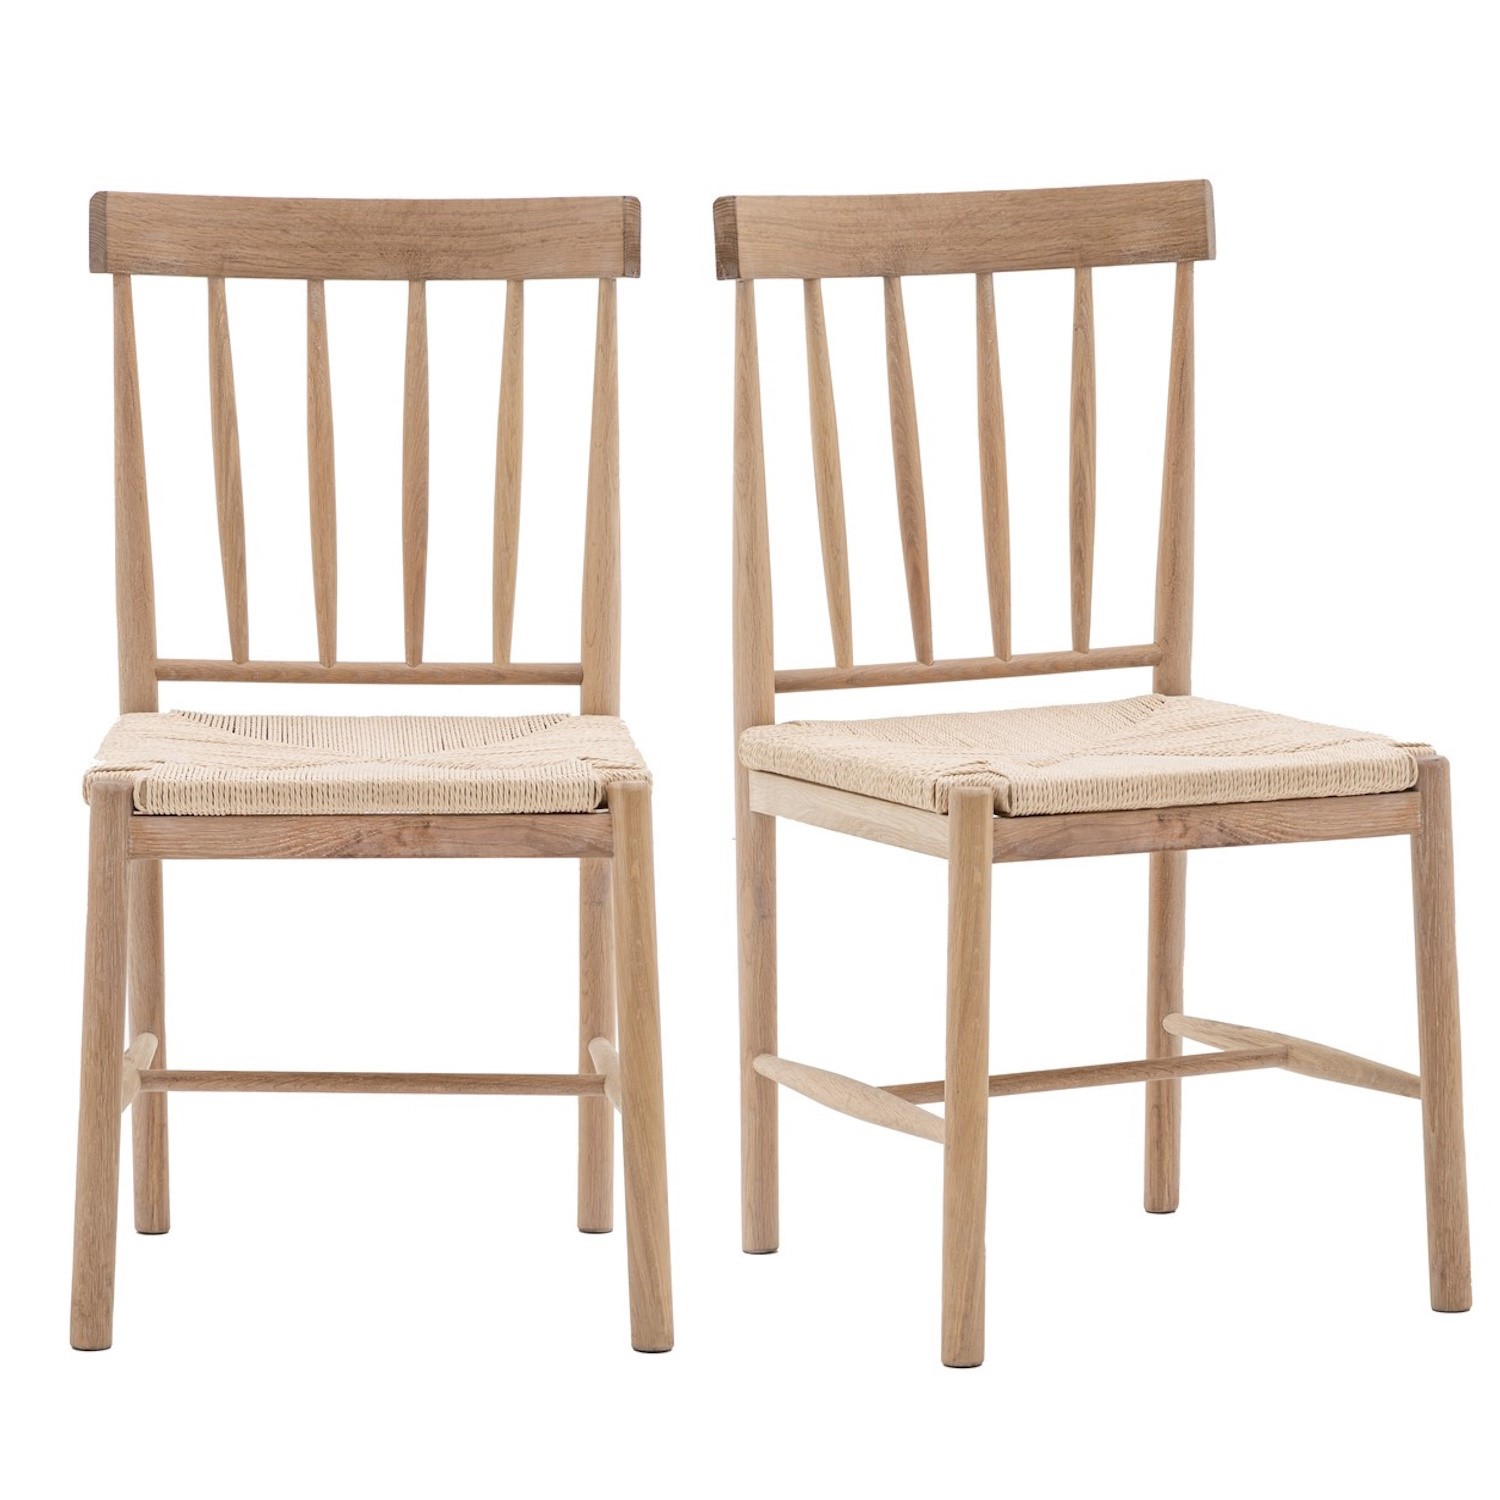 Photo of Eton dining chairs set of 2 natural - caspian house